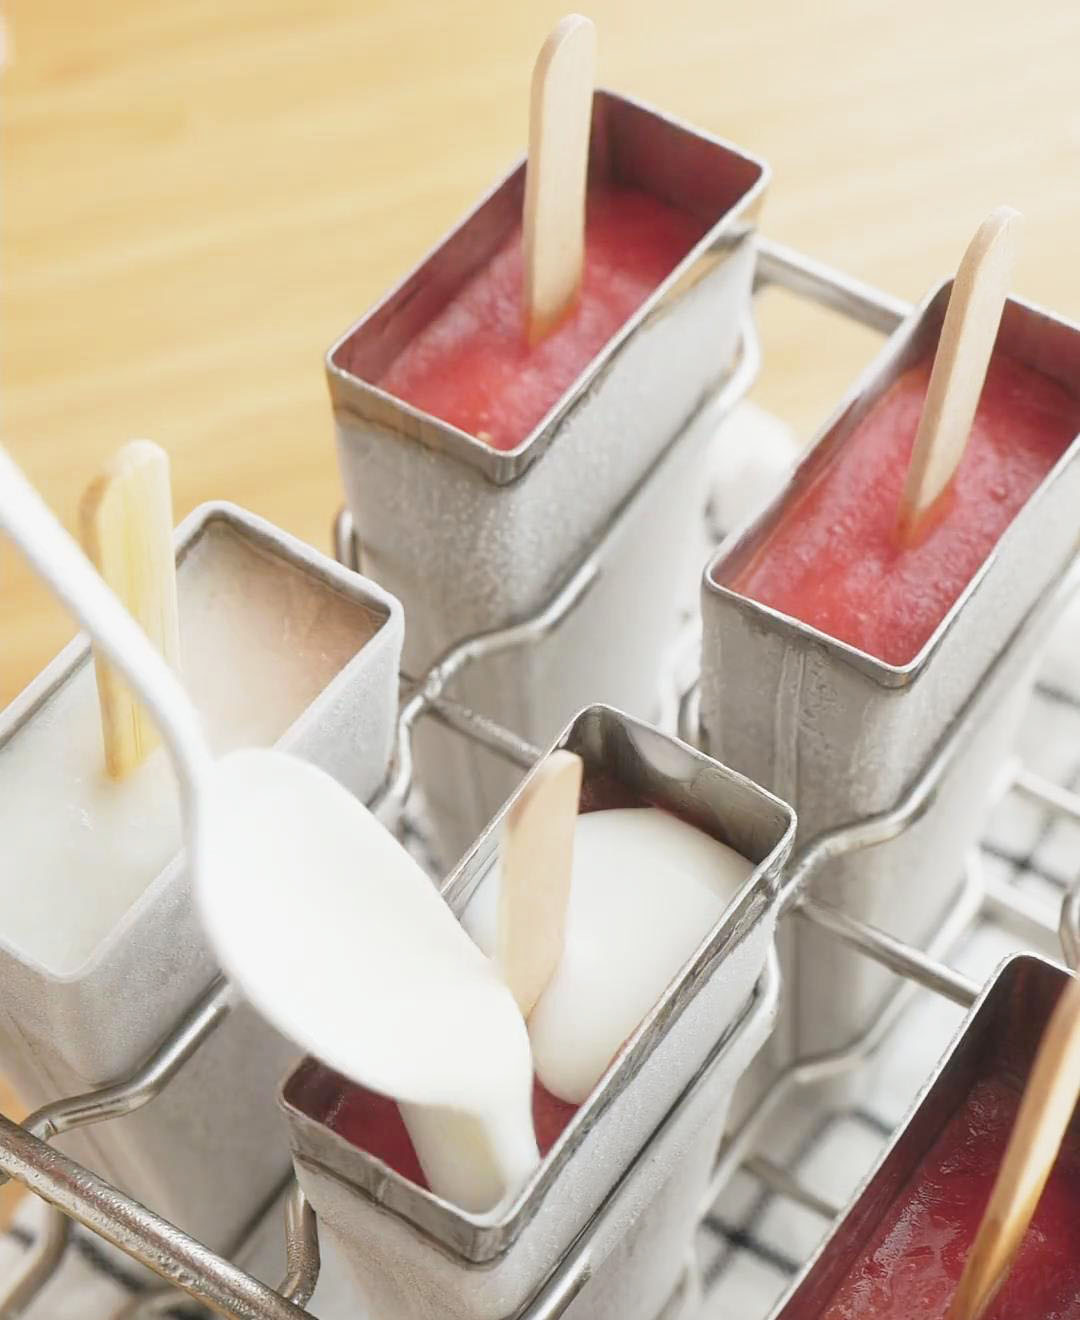 add a layer of yogurt on top of each popsicle